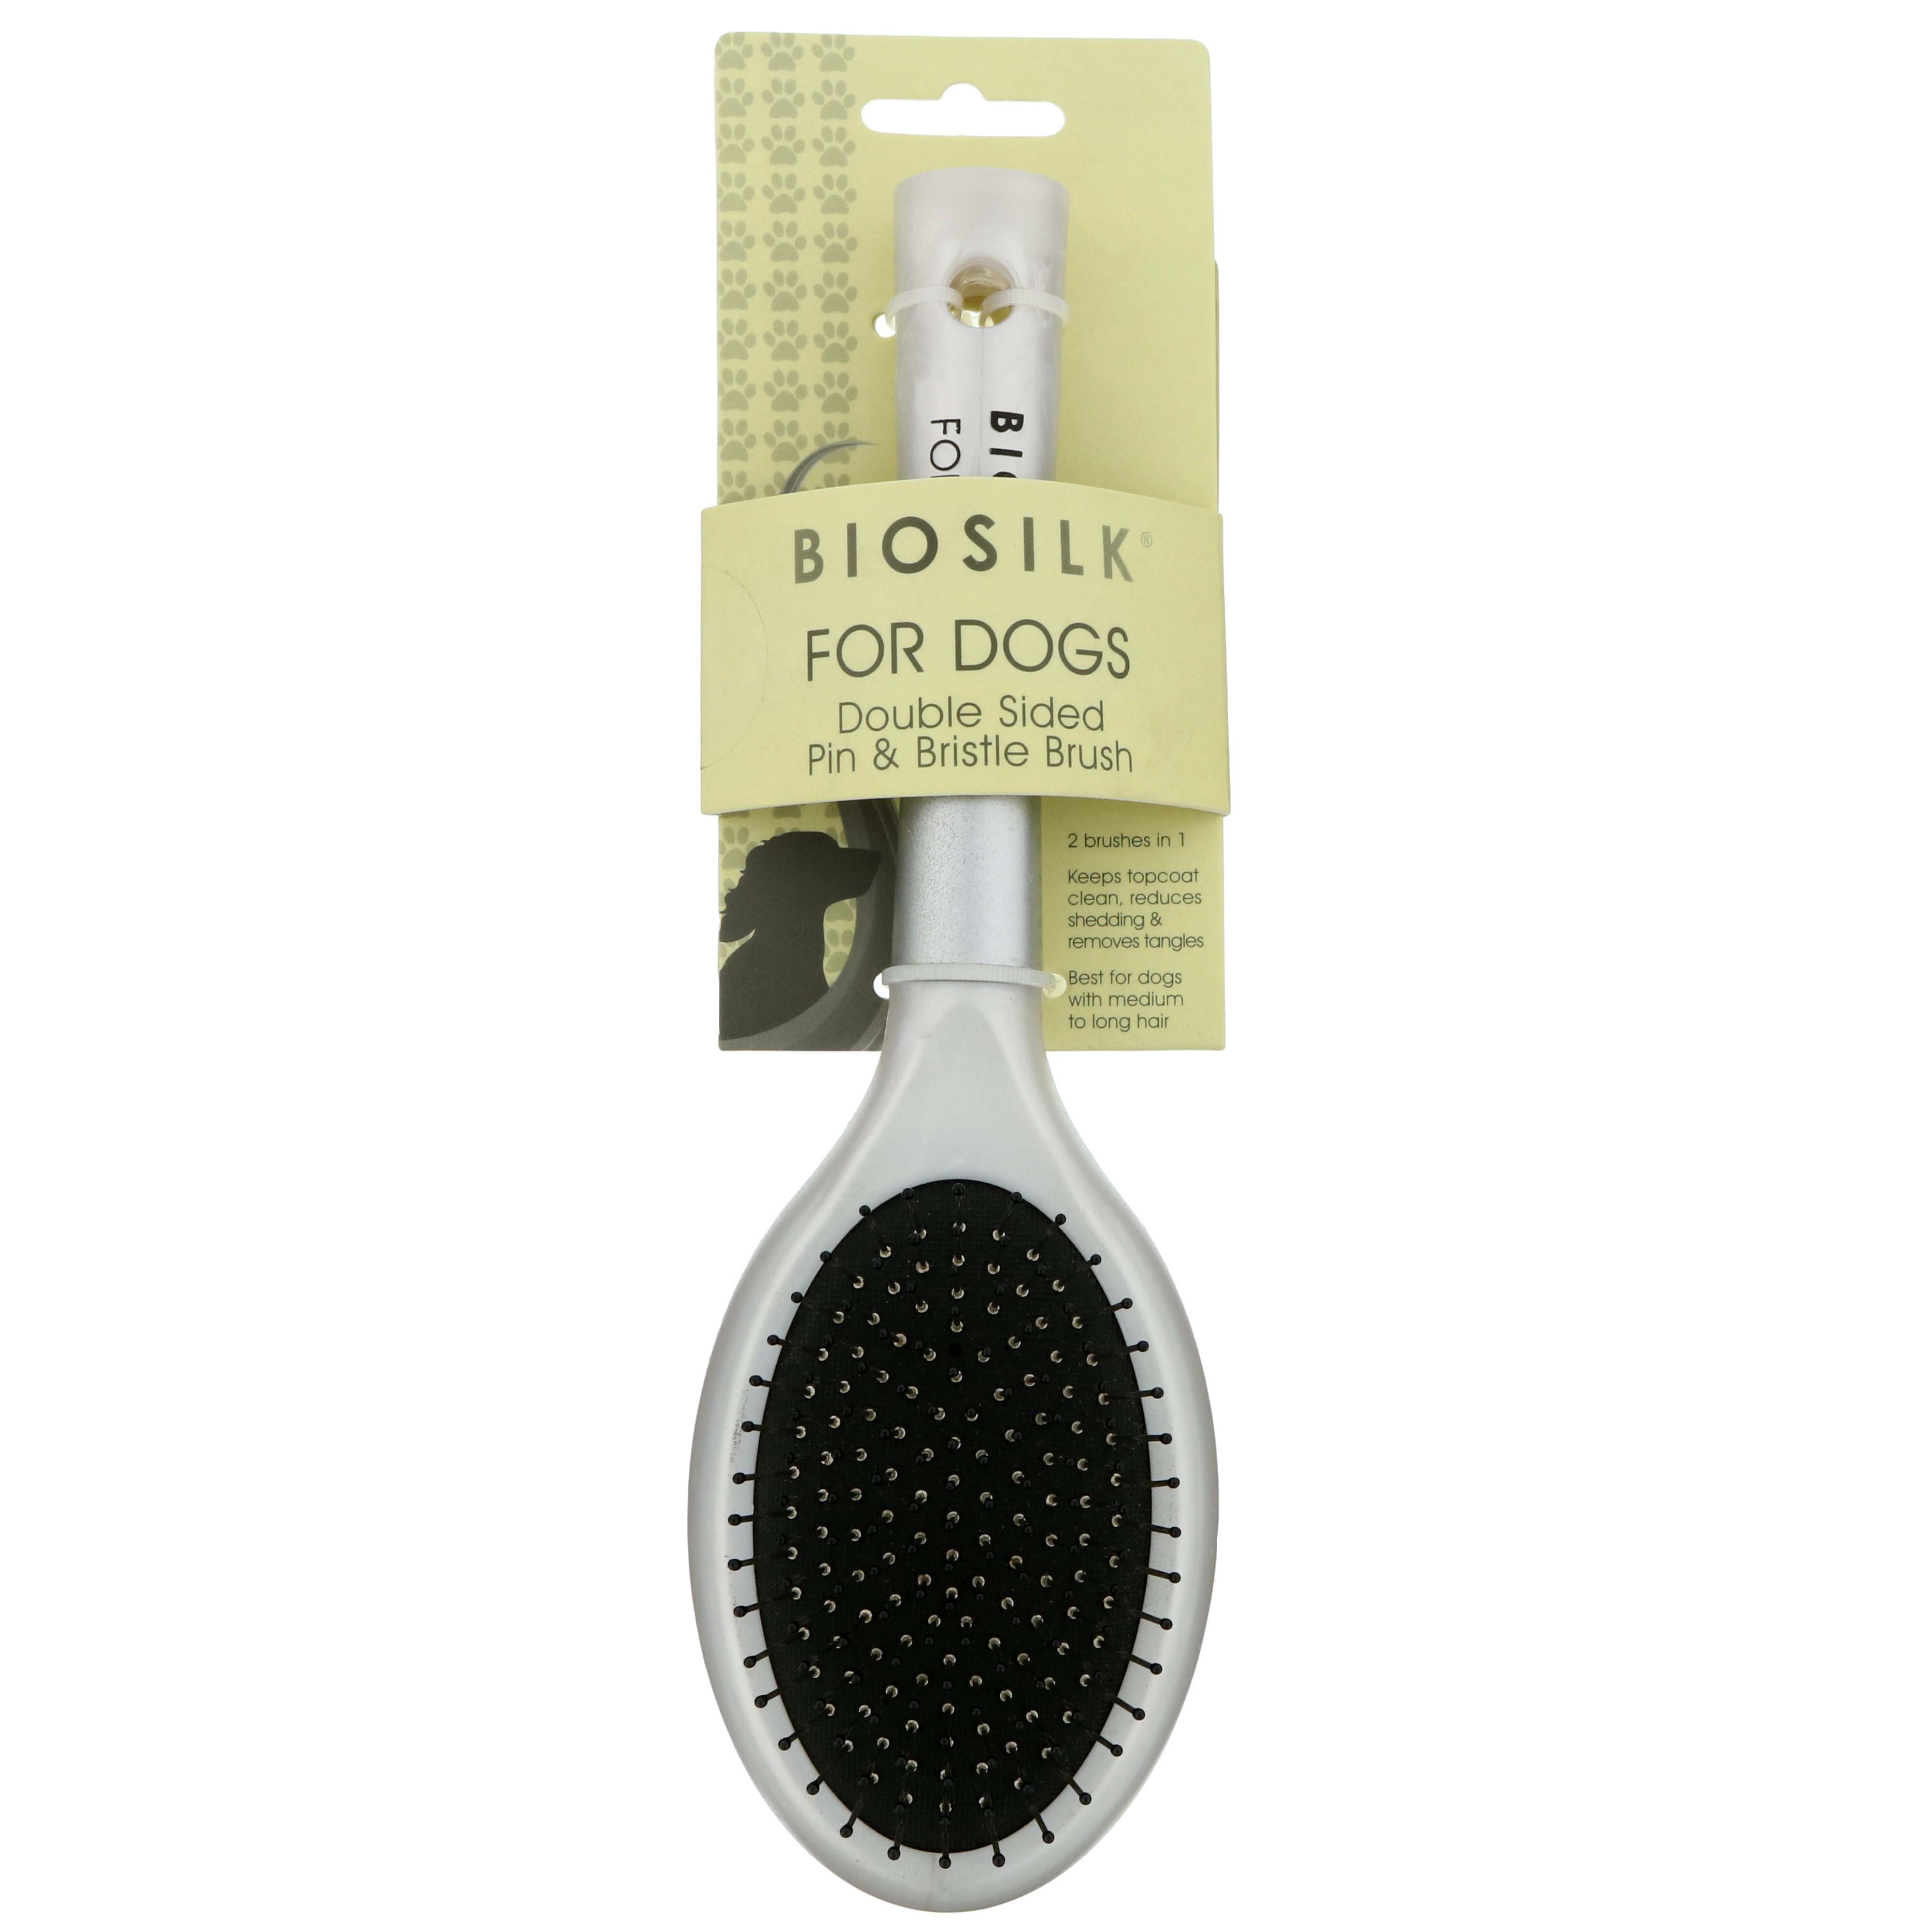 Biosilk Double Sided Pin And Bristle Brush For Dogs Shop Grooming At H E B